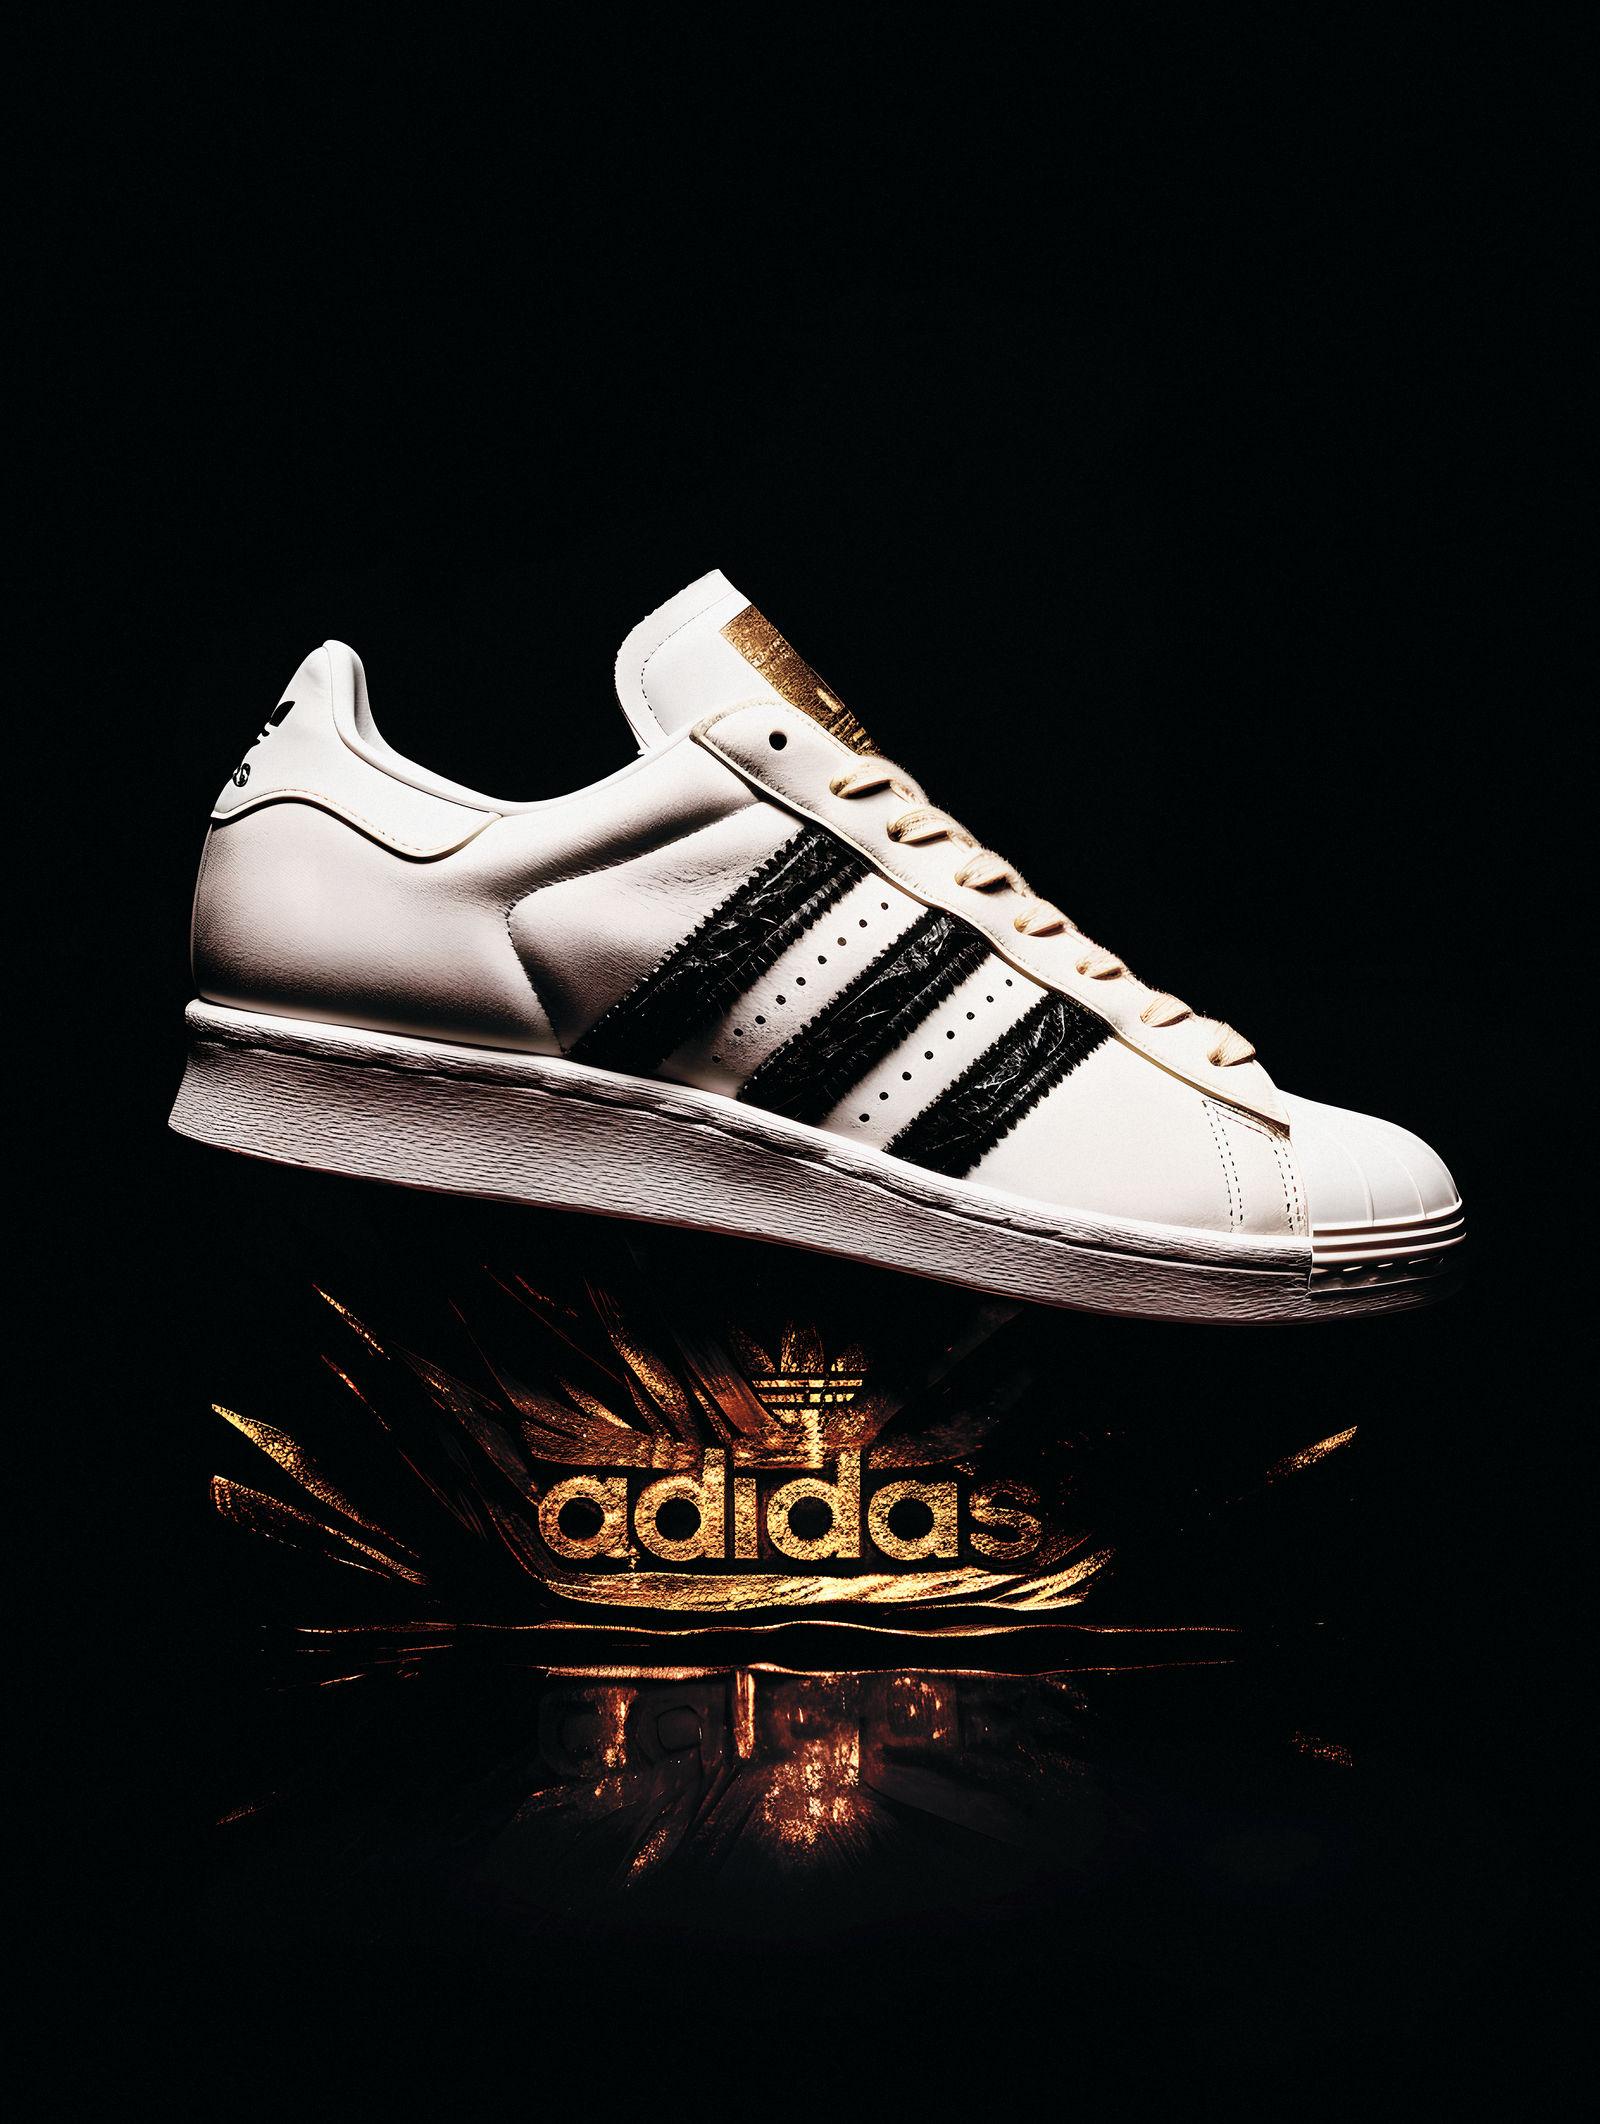 Adidas The One Superstar By Felipemaa